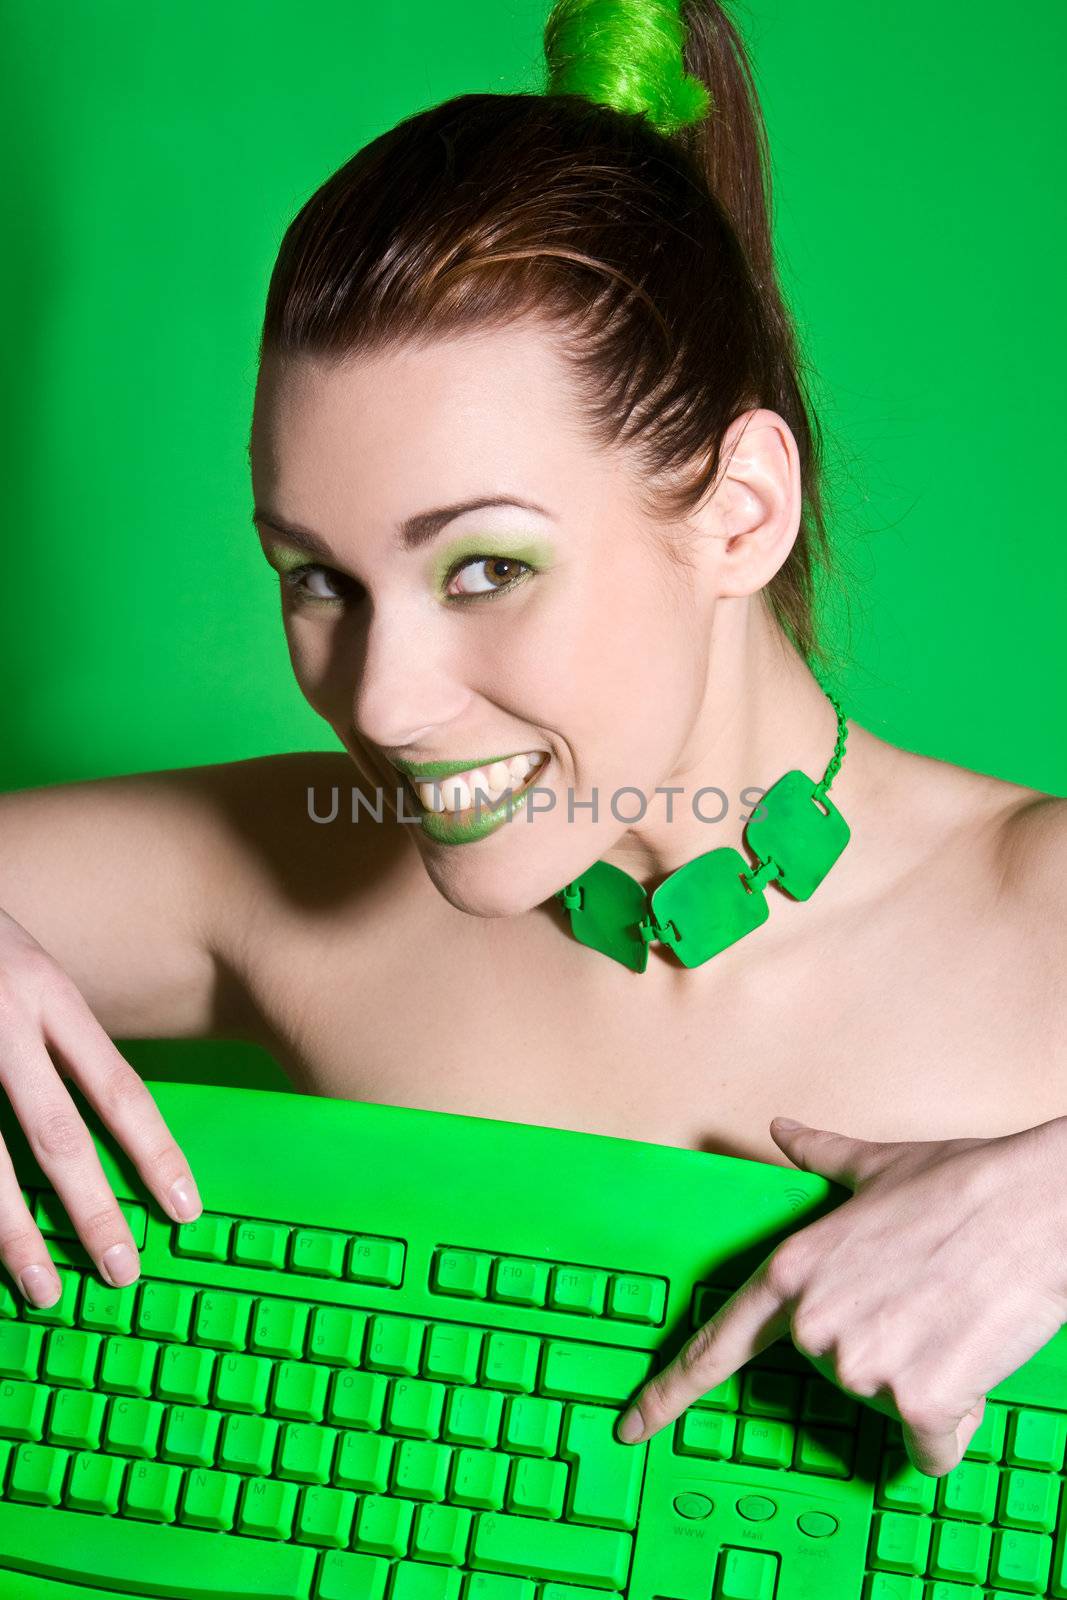 Pretty brunette with cheeky smile hitting the enter key on keyboard